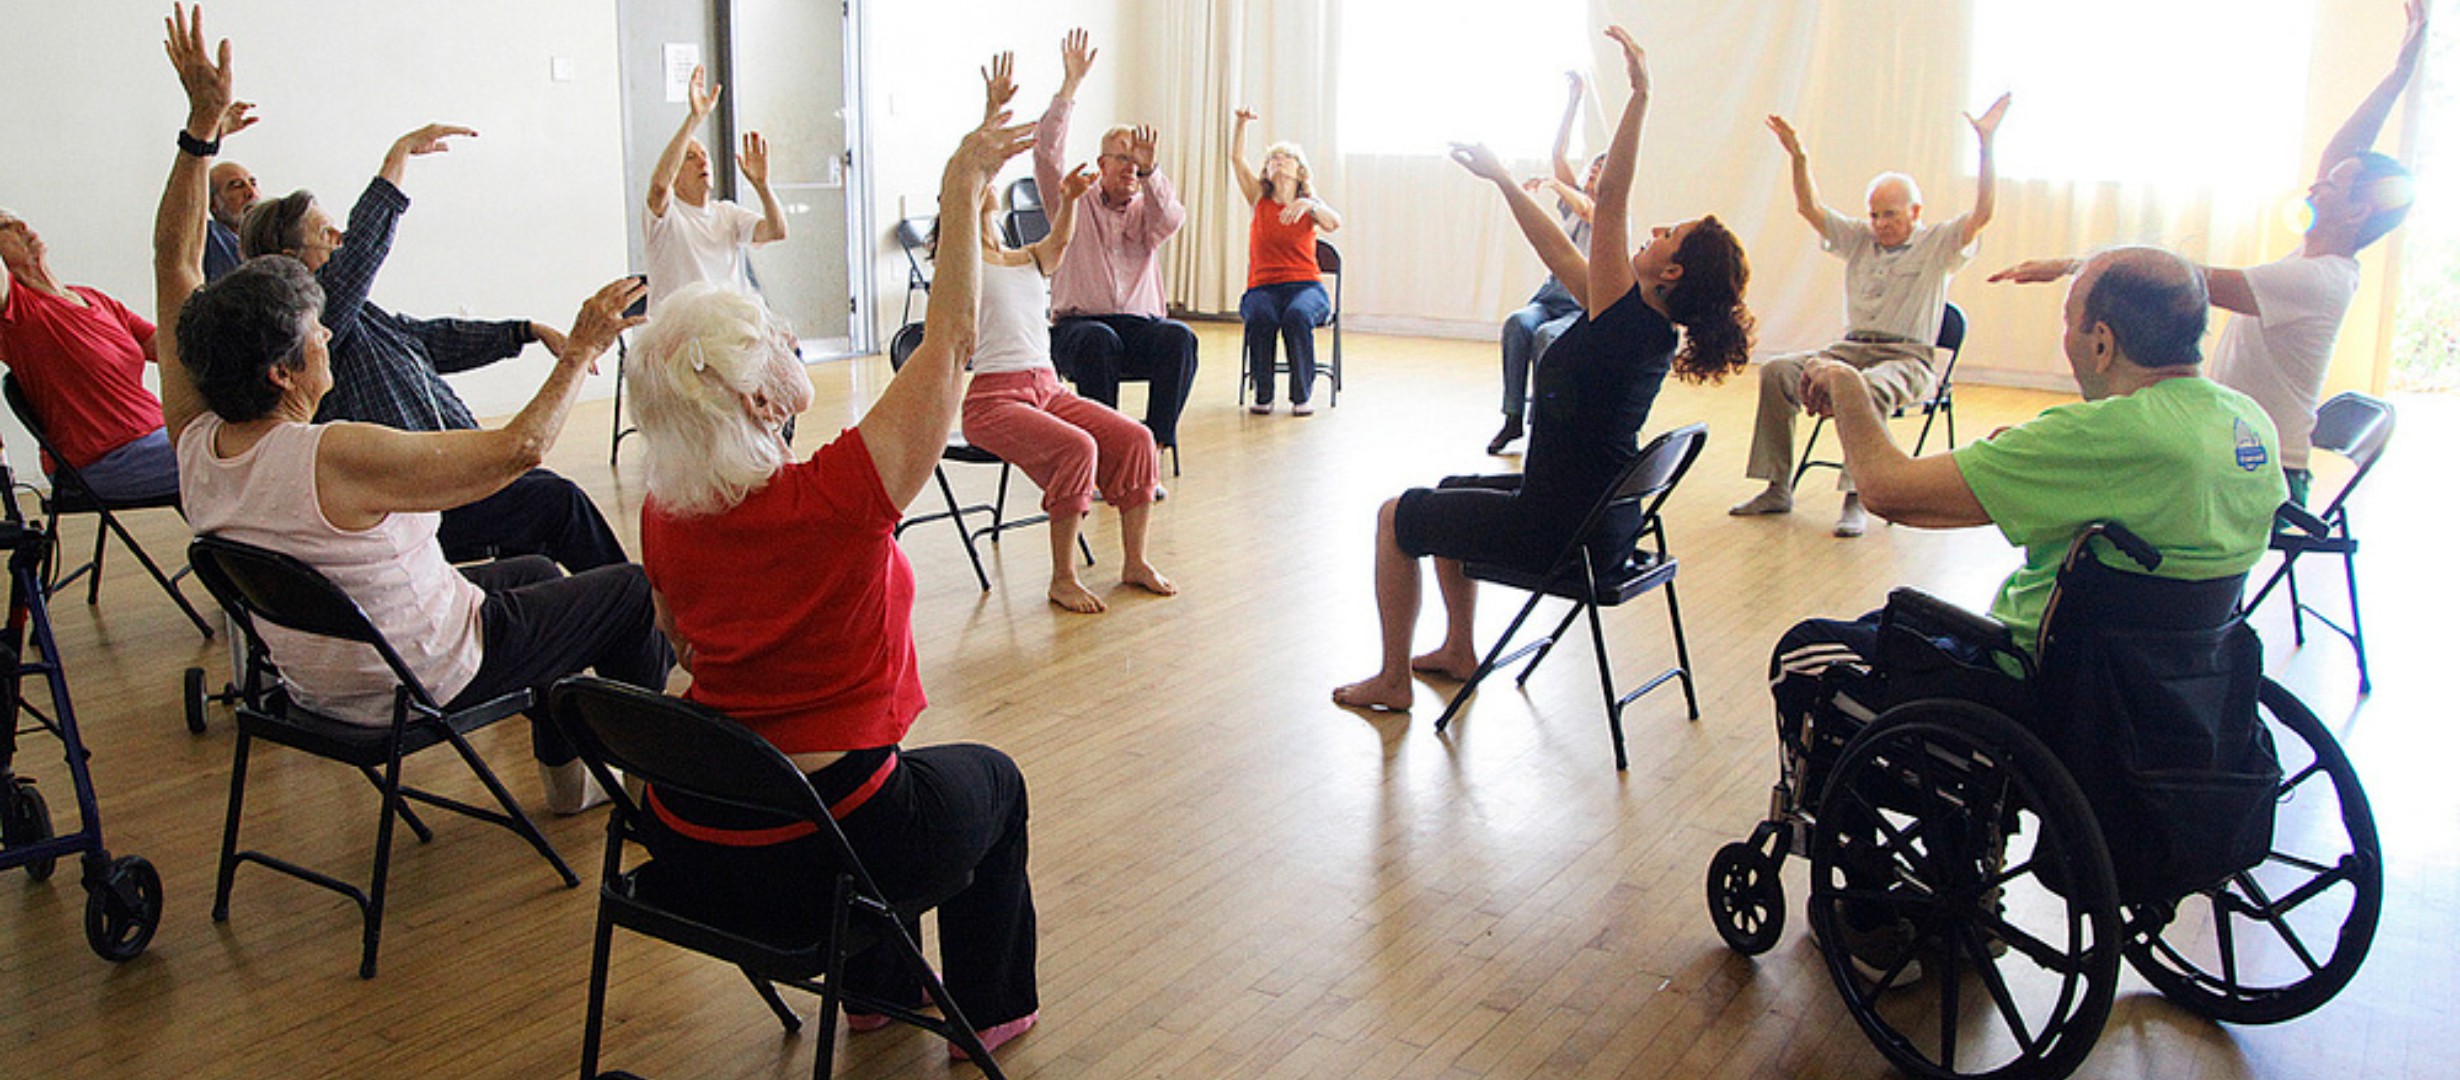 dance instructor doing arm movements with a class of seated participants 